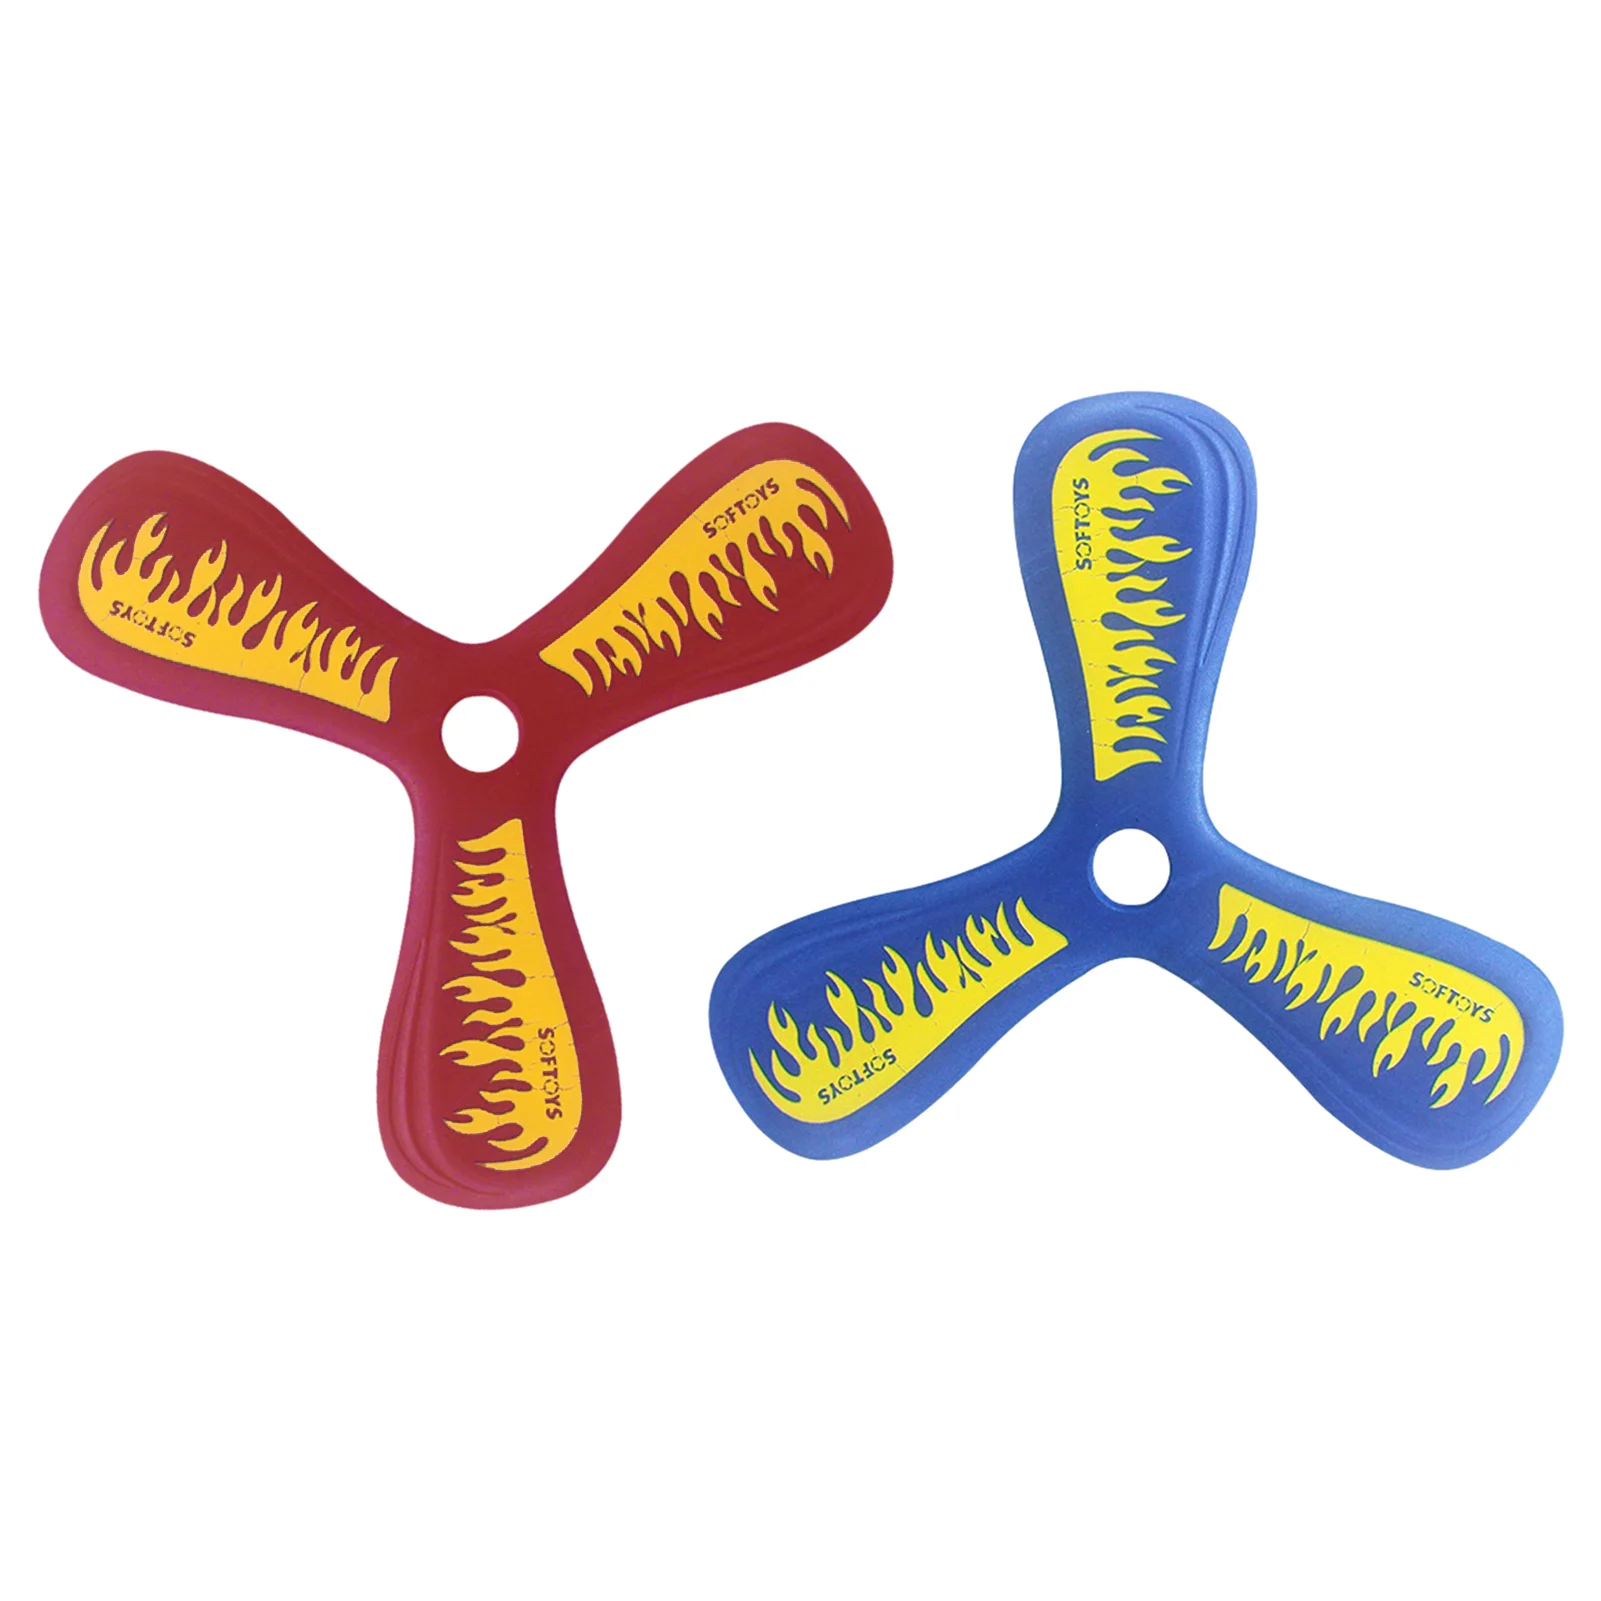 

Profesional Boomerang Children's Puzzle Decompression Toy Safe Durable Outdoor Yard Games Toys Sports Sports Fun Game Attractive